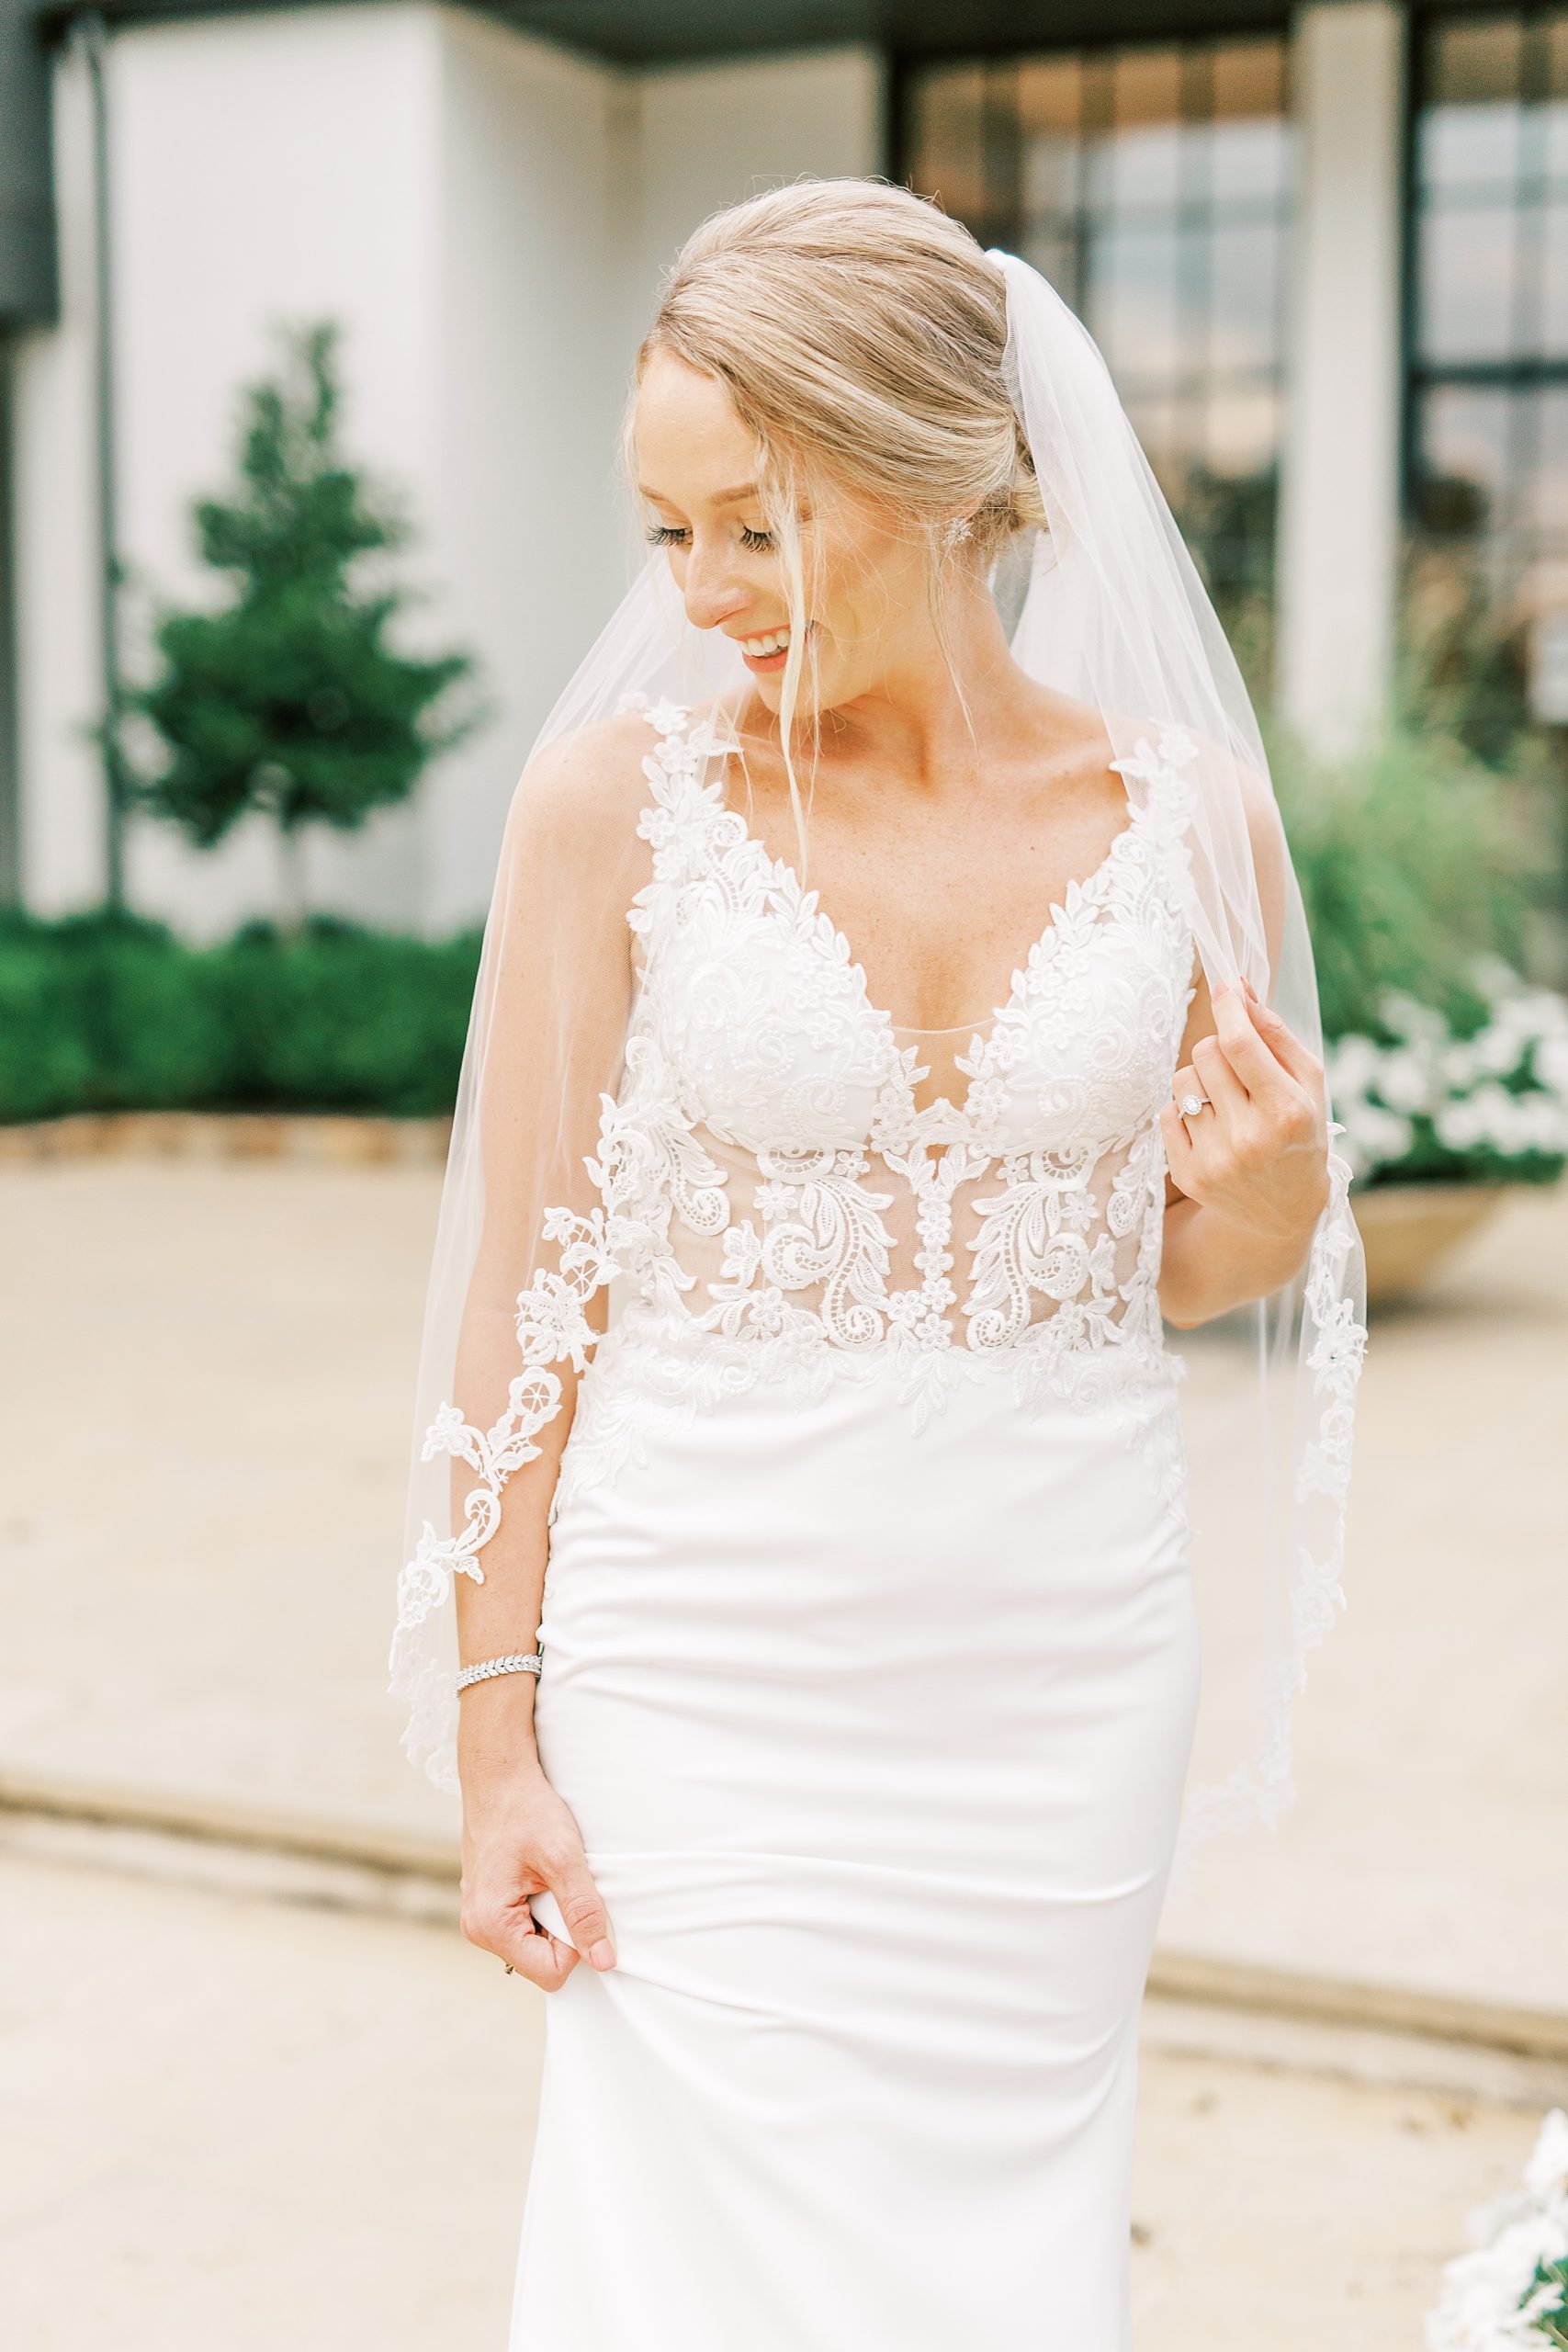 lace details on wedding dress from BlueBird Bridal